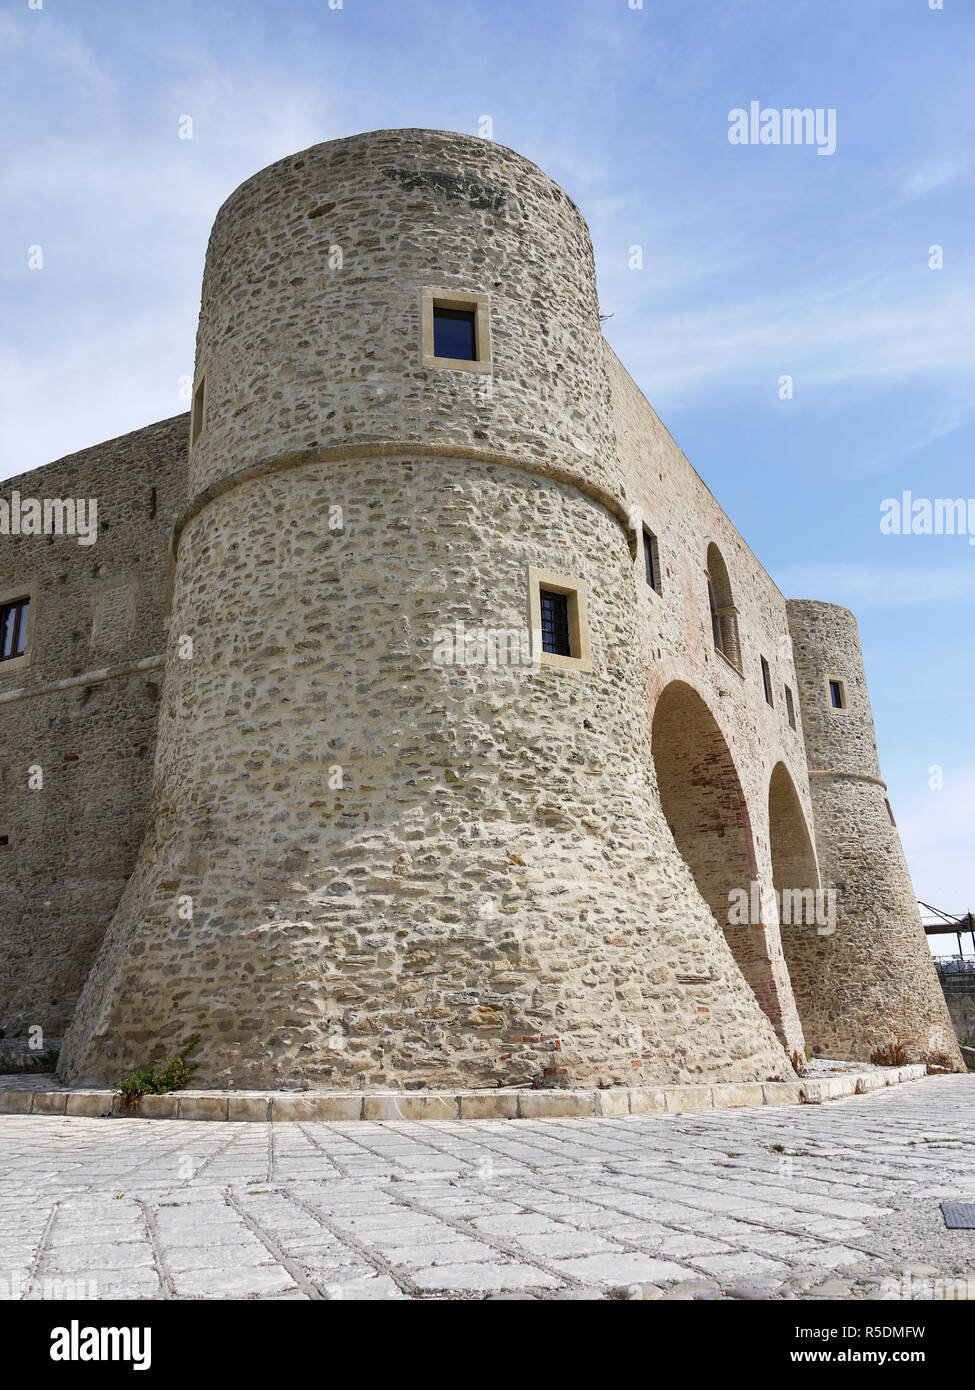 The castle in the hill top town of Bernalda in Basilicata, Southern Italy Stock Photo